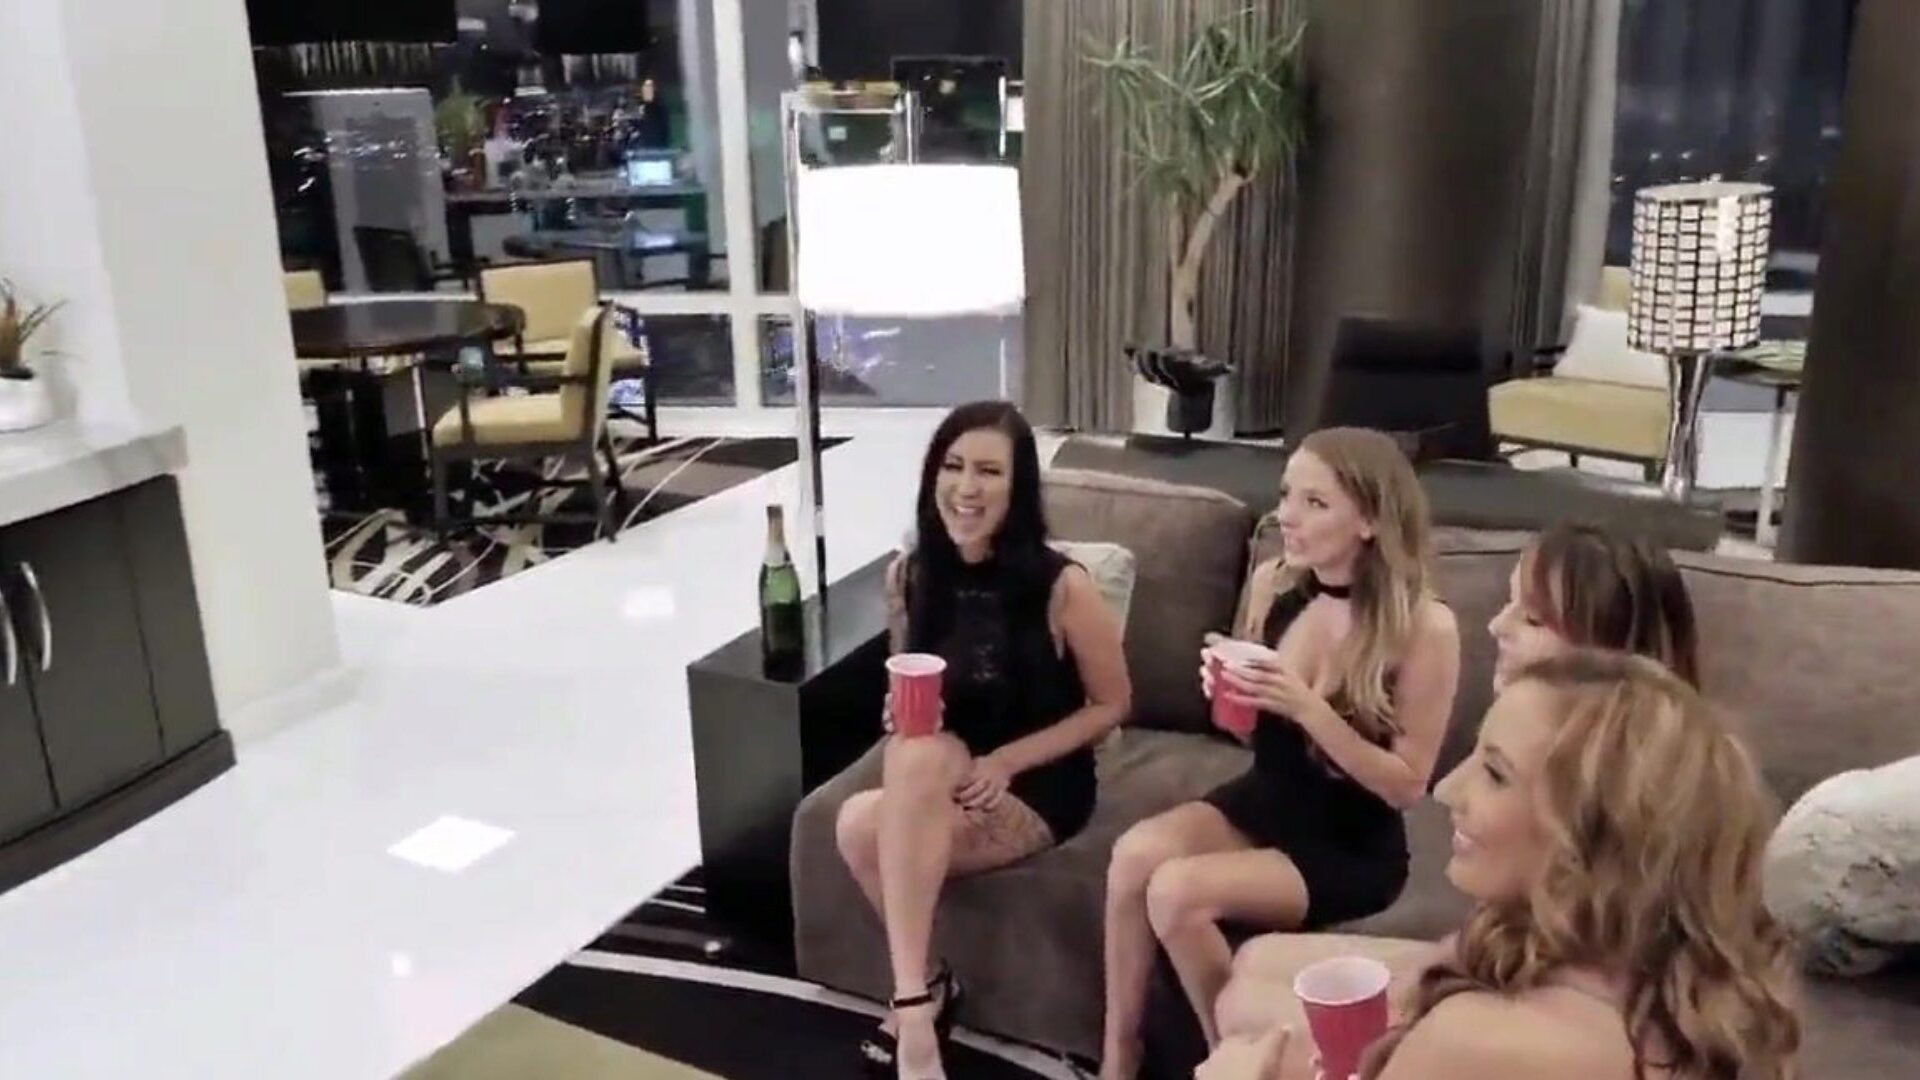 Bachelorette Party and Orgy Before Wedding: Free HD Porn f6 | xHamster Watch Bachelorette Party and Orgy Before Wedding video on xHamster - the ultimate collection of free-for-all Side Fucking & Bachelorette Party Fuck HD porn tube episodes